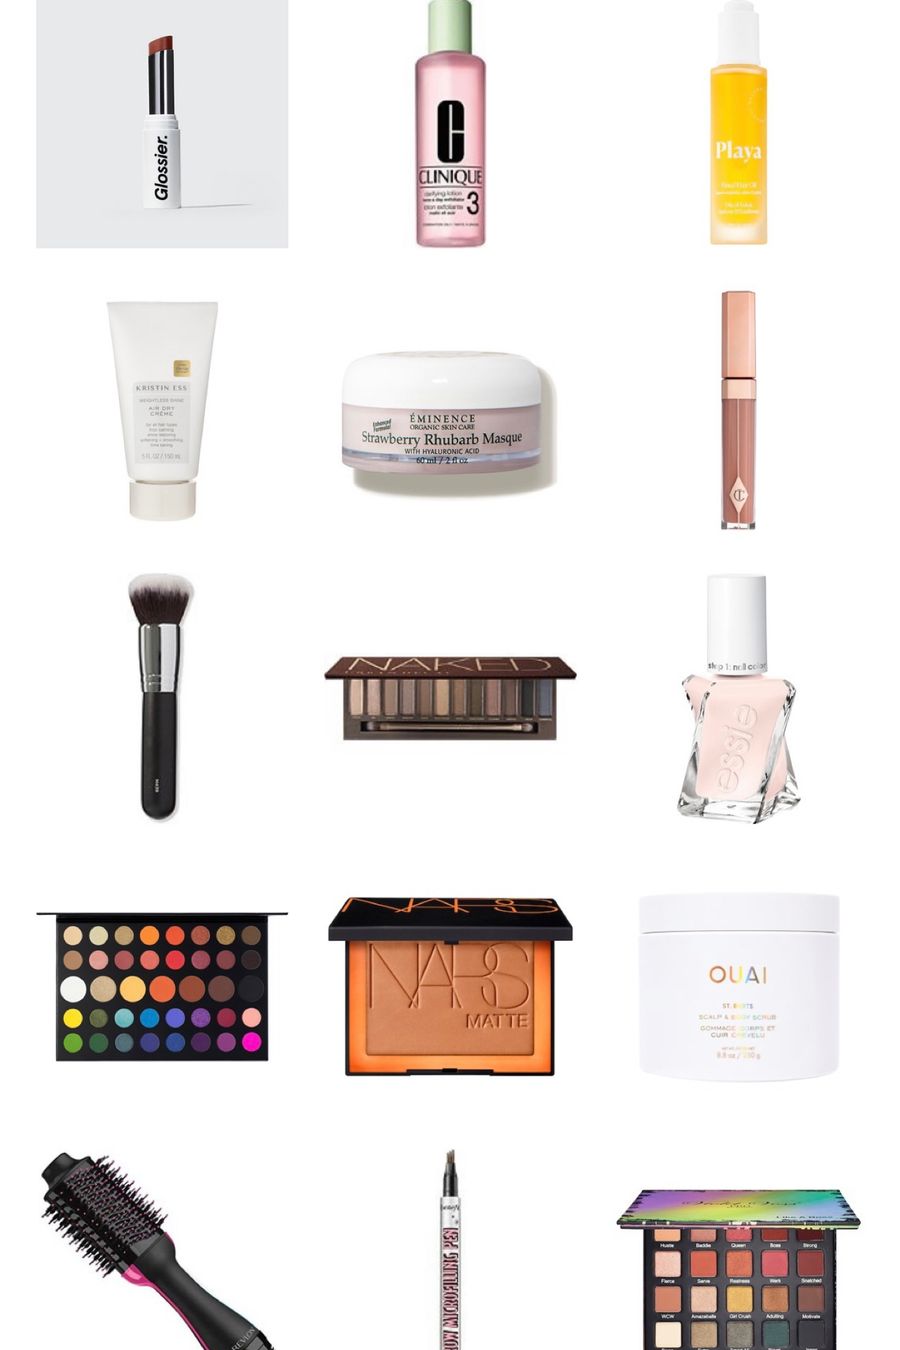 Gift ideas for the makeup & beauty junkies